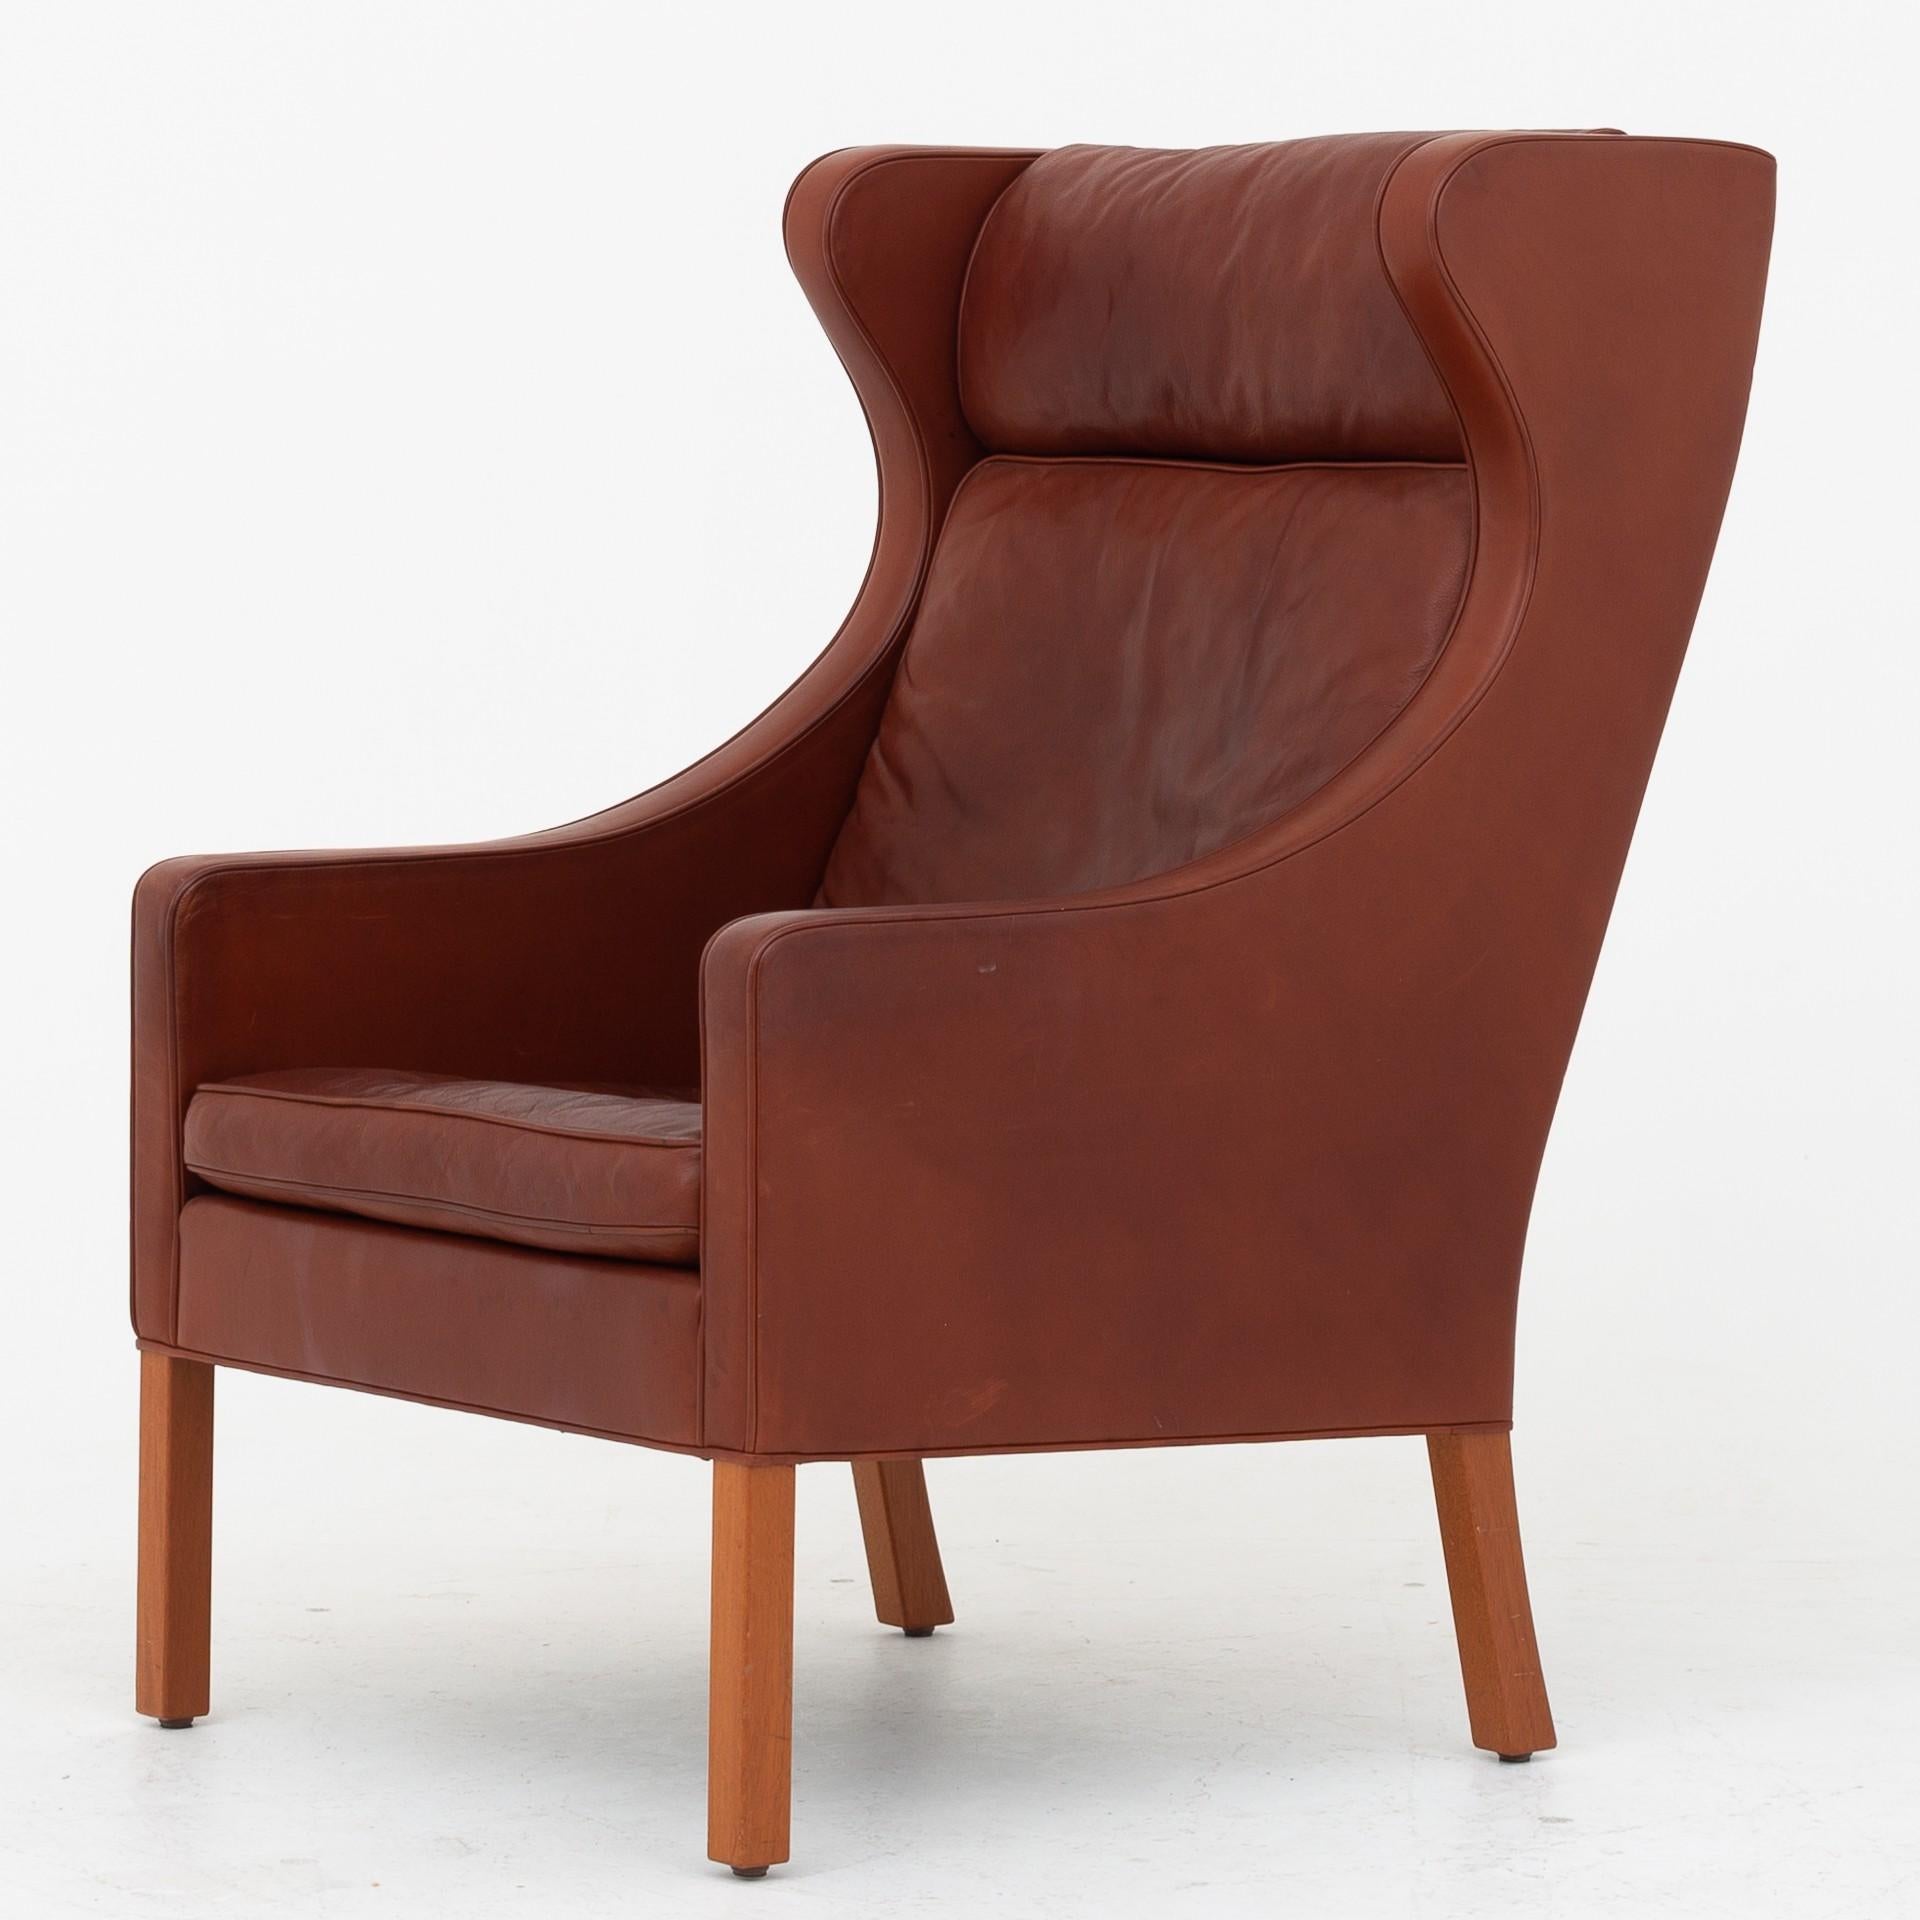 Wingback chair (BM 2204) with stool (BM 2202) in original reddish/brown leather and legs of mahogany. Maker Fredericia Furniture.